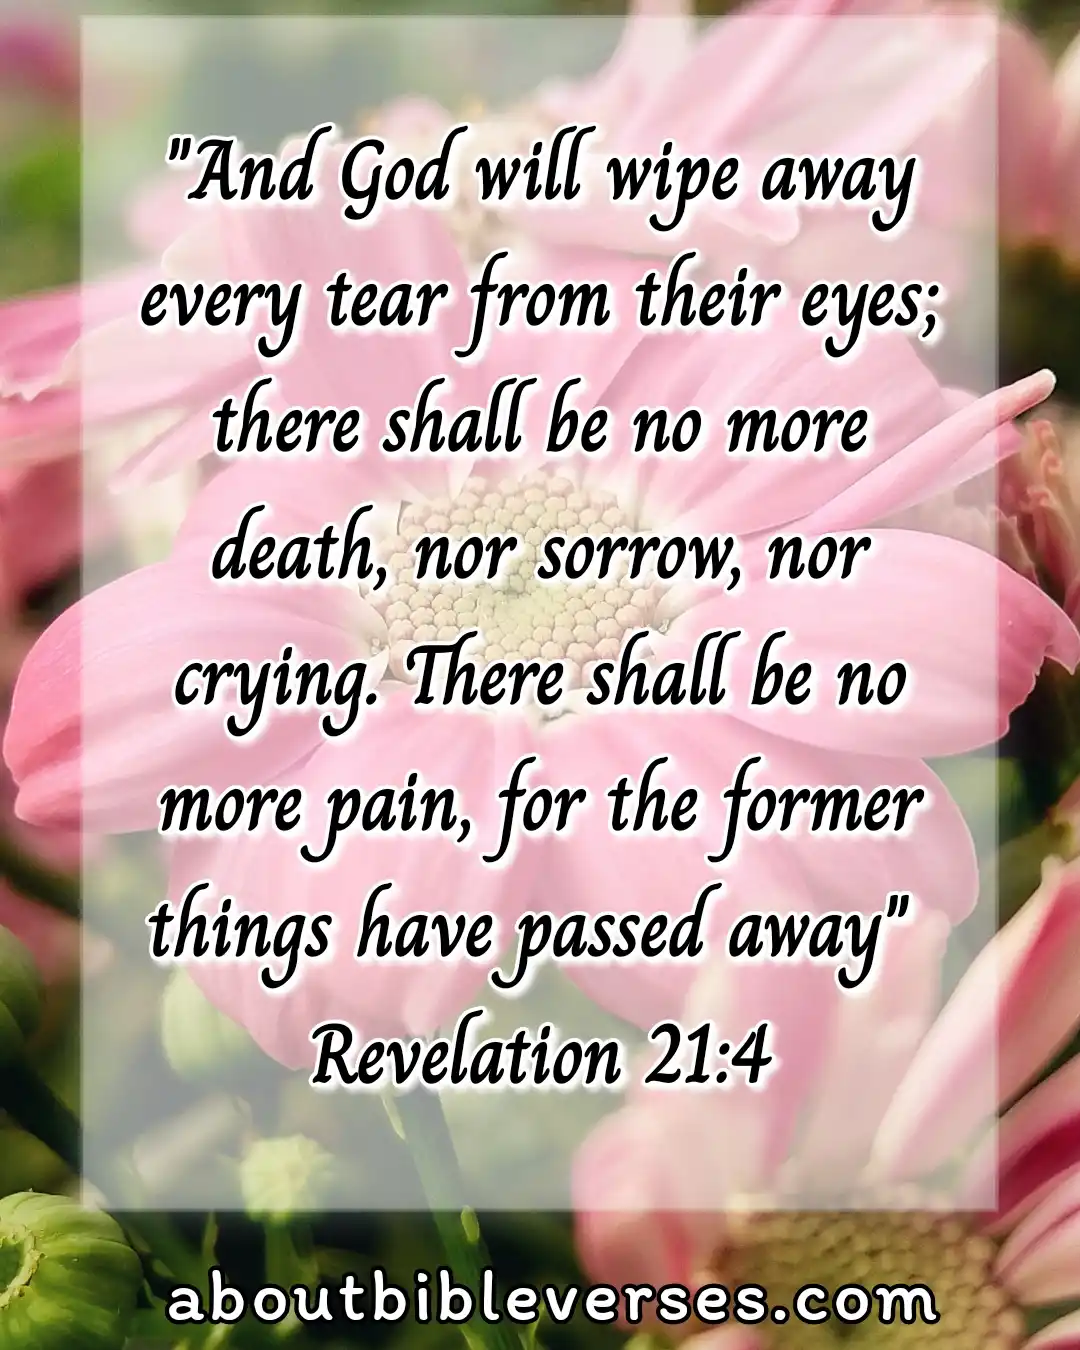 Bible Verses About Mourning The Loss Of A Loved One (Revelation 21:4)